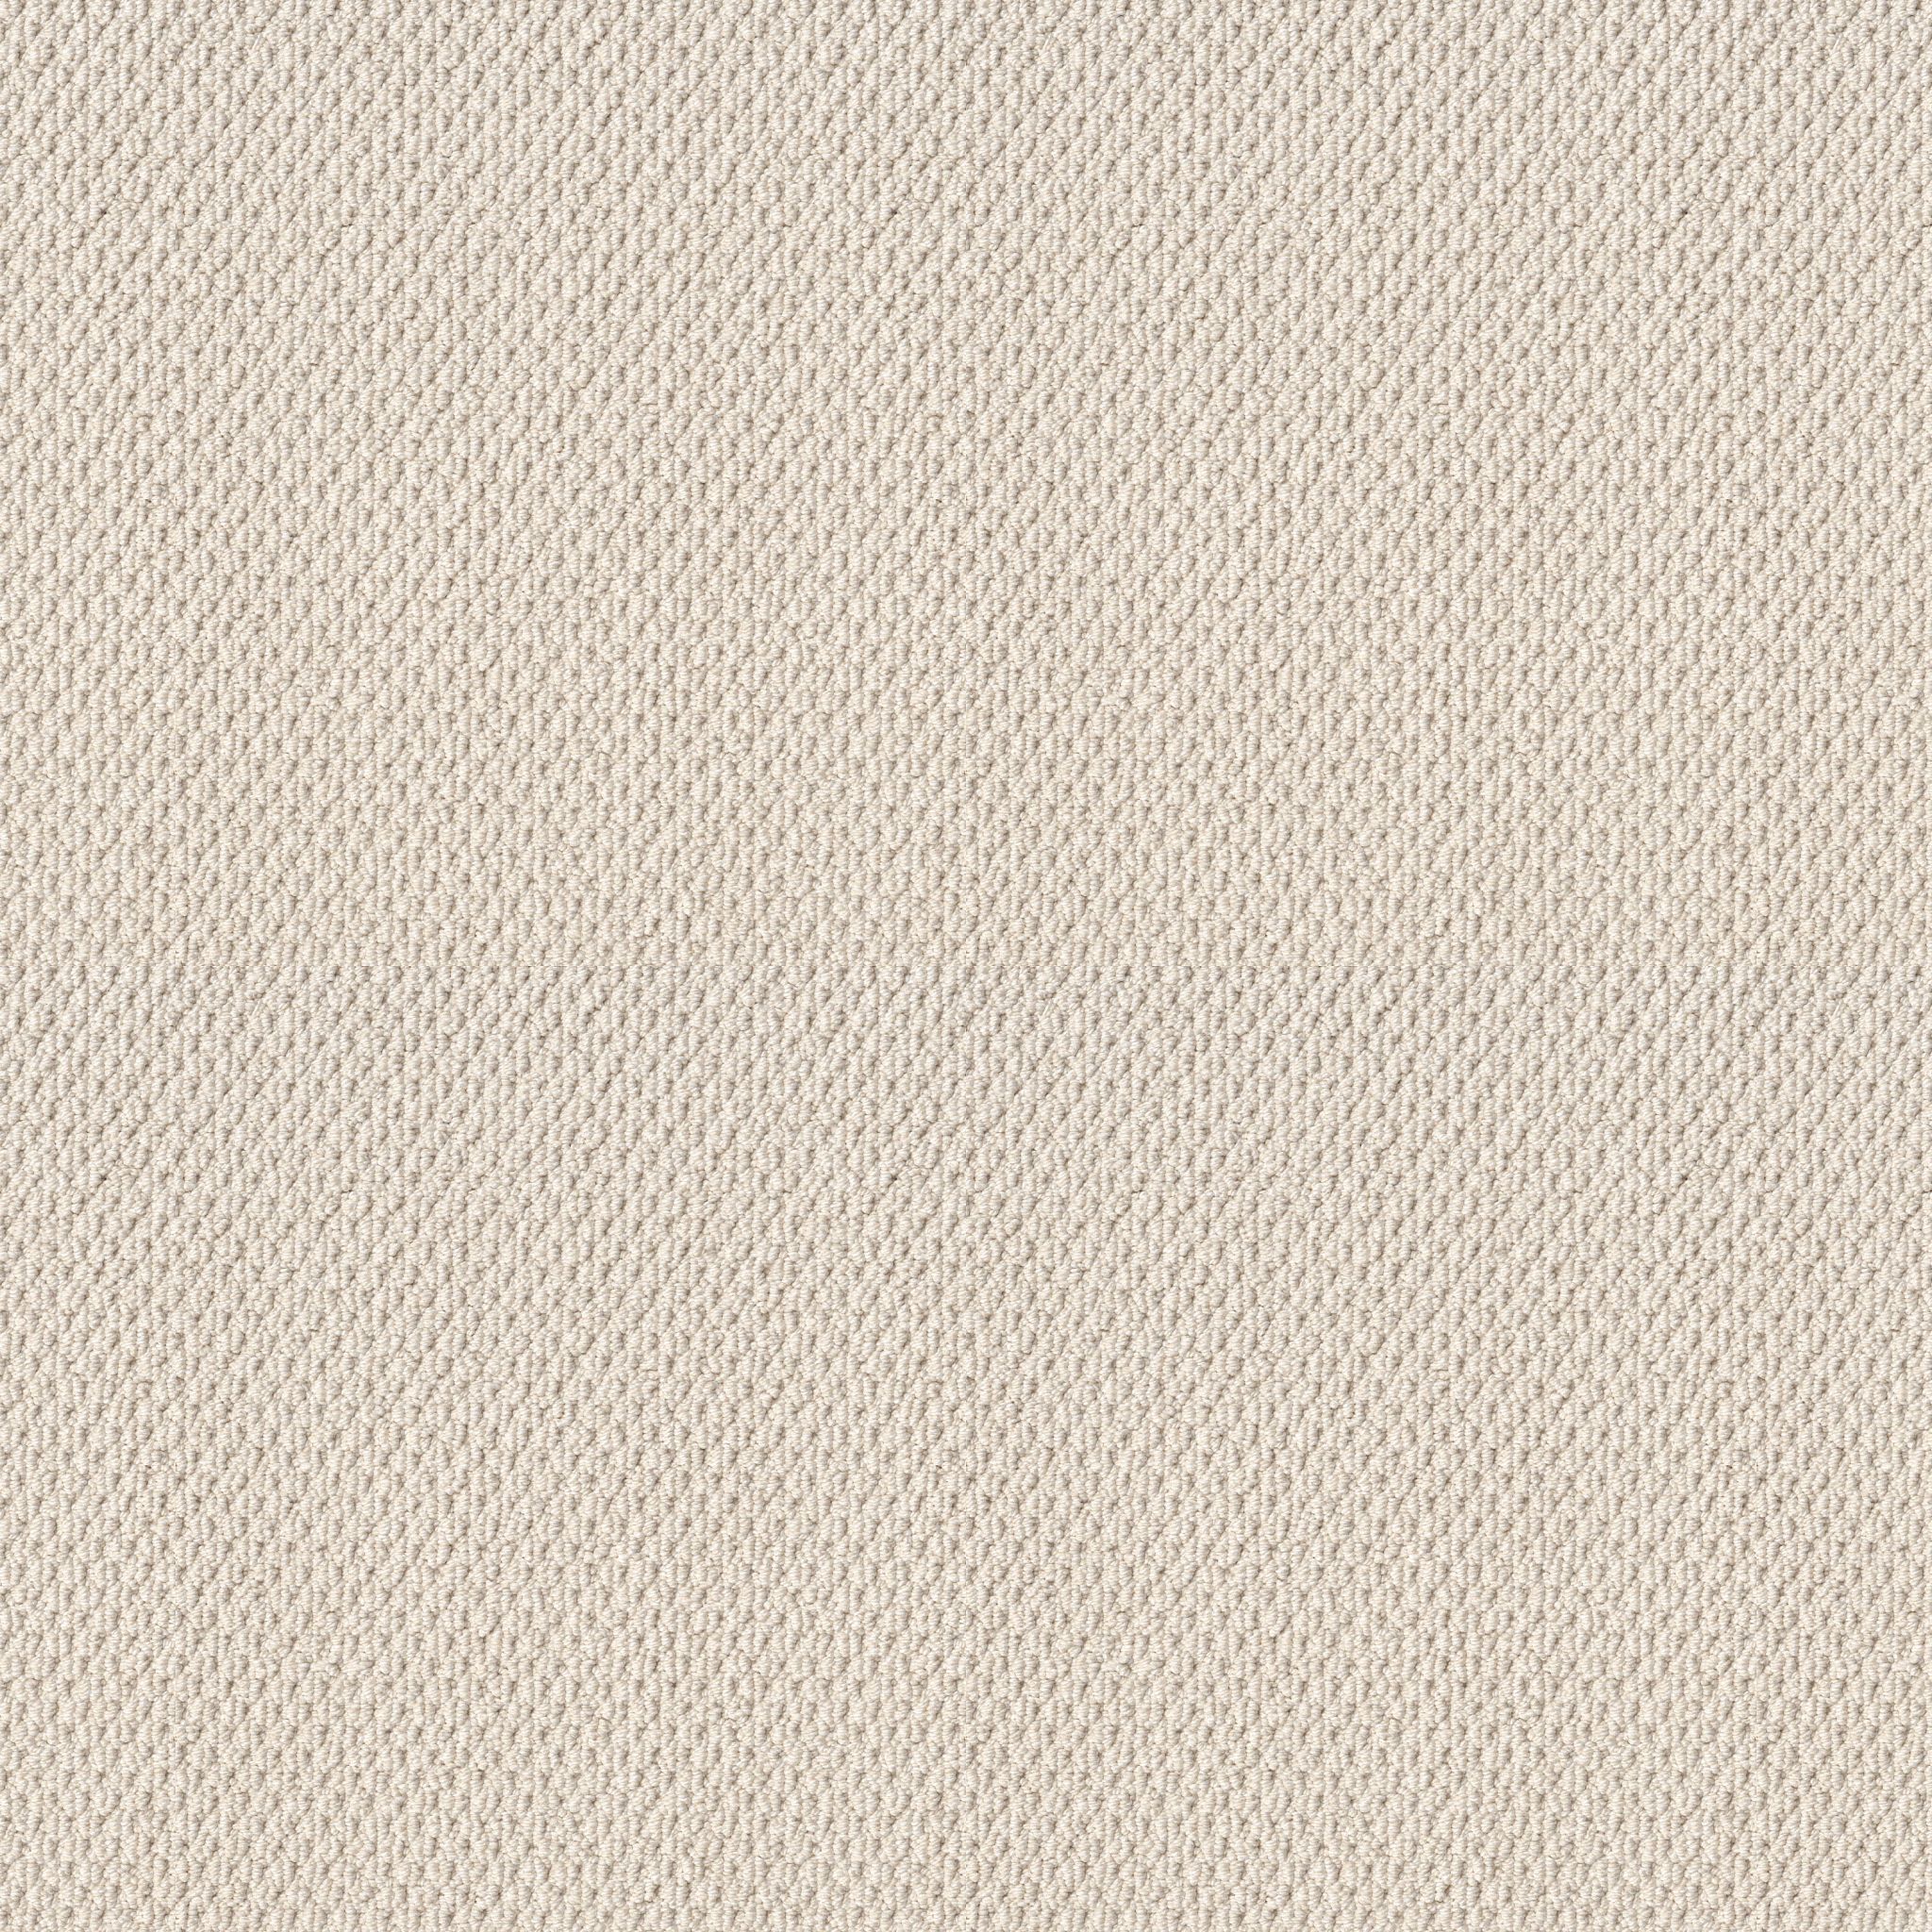 Style name and number: Naturalistic 5E442 and color name and number: Champagne Toast 00153